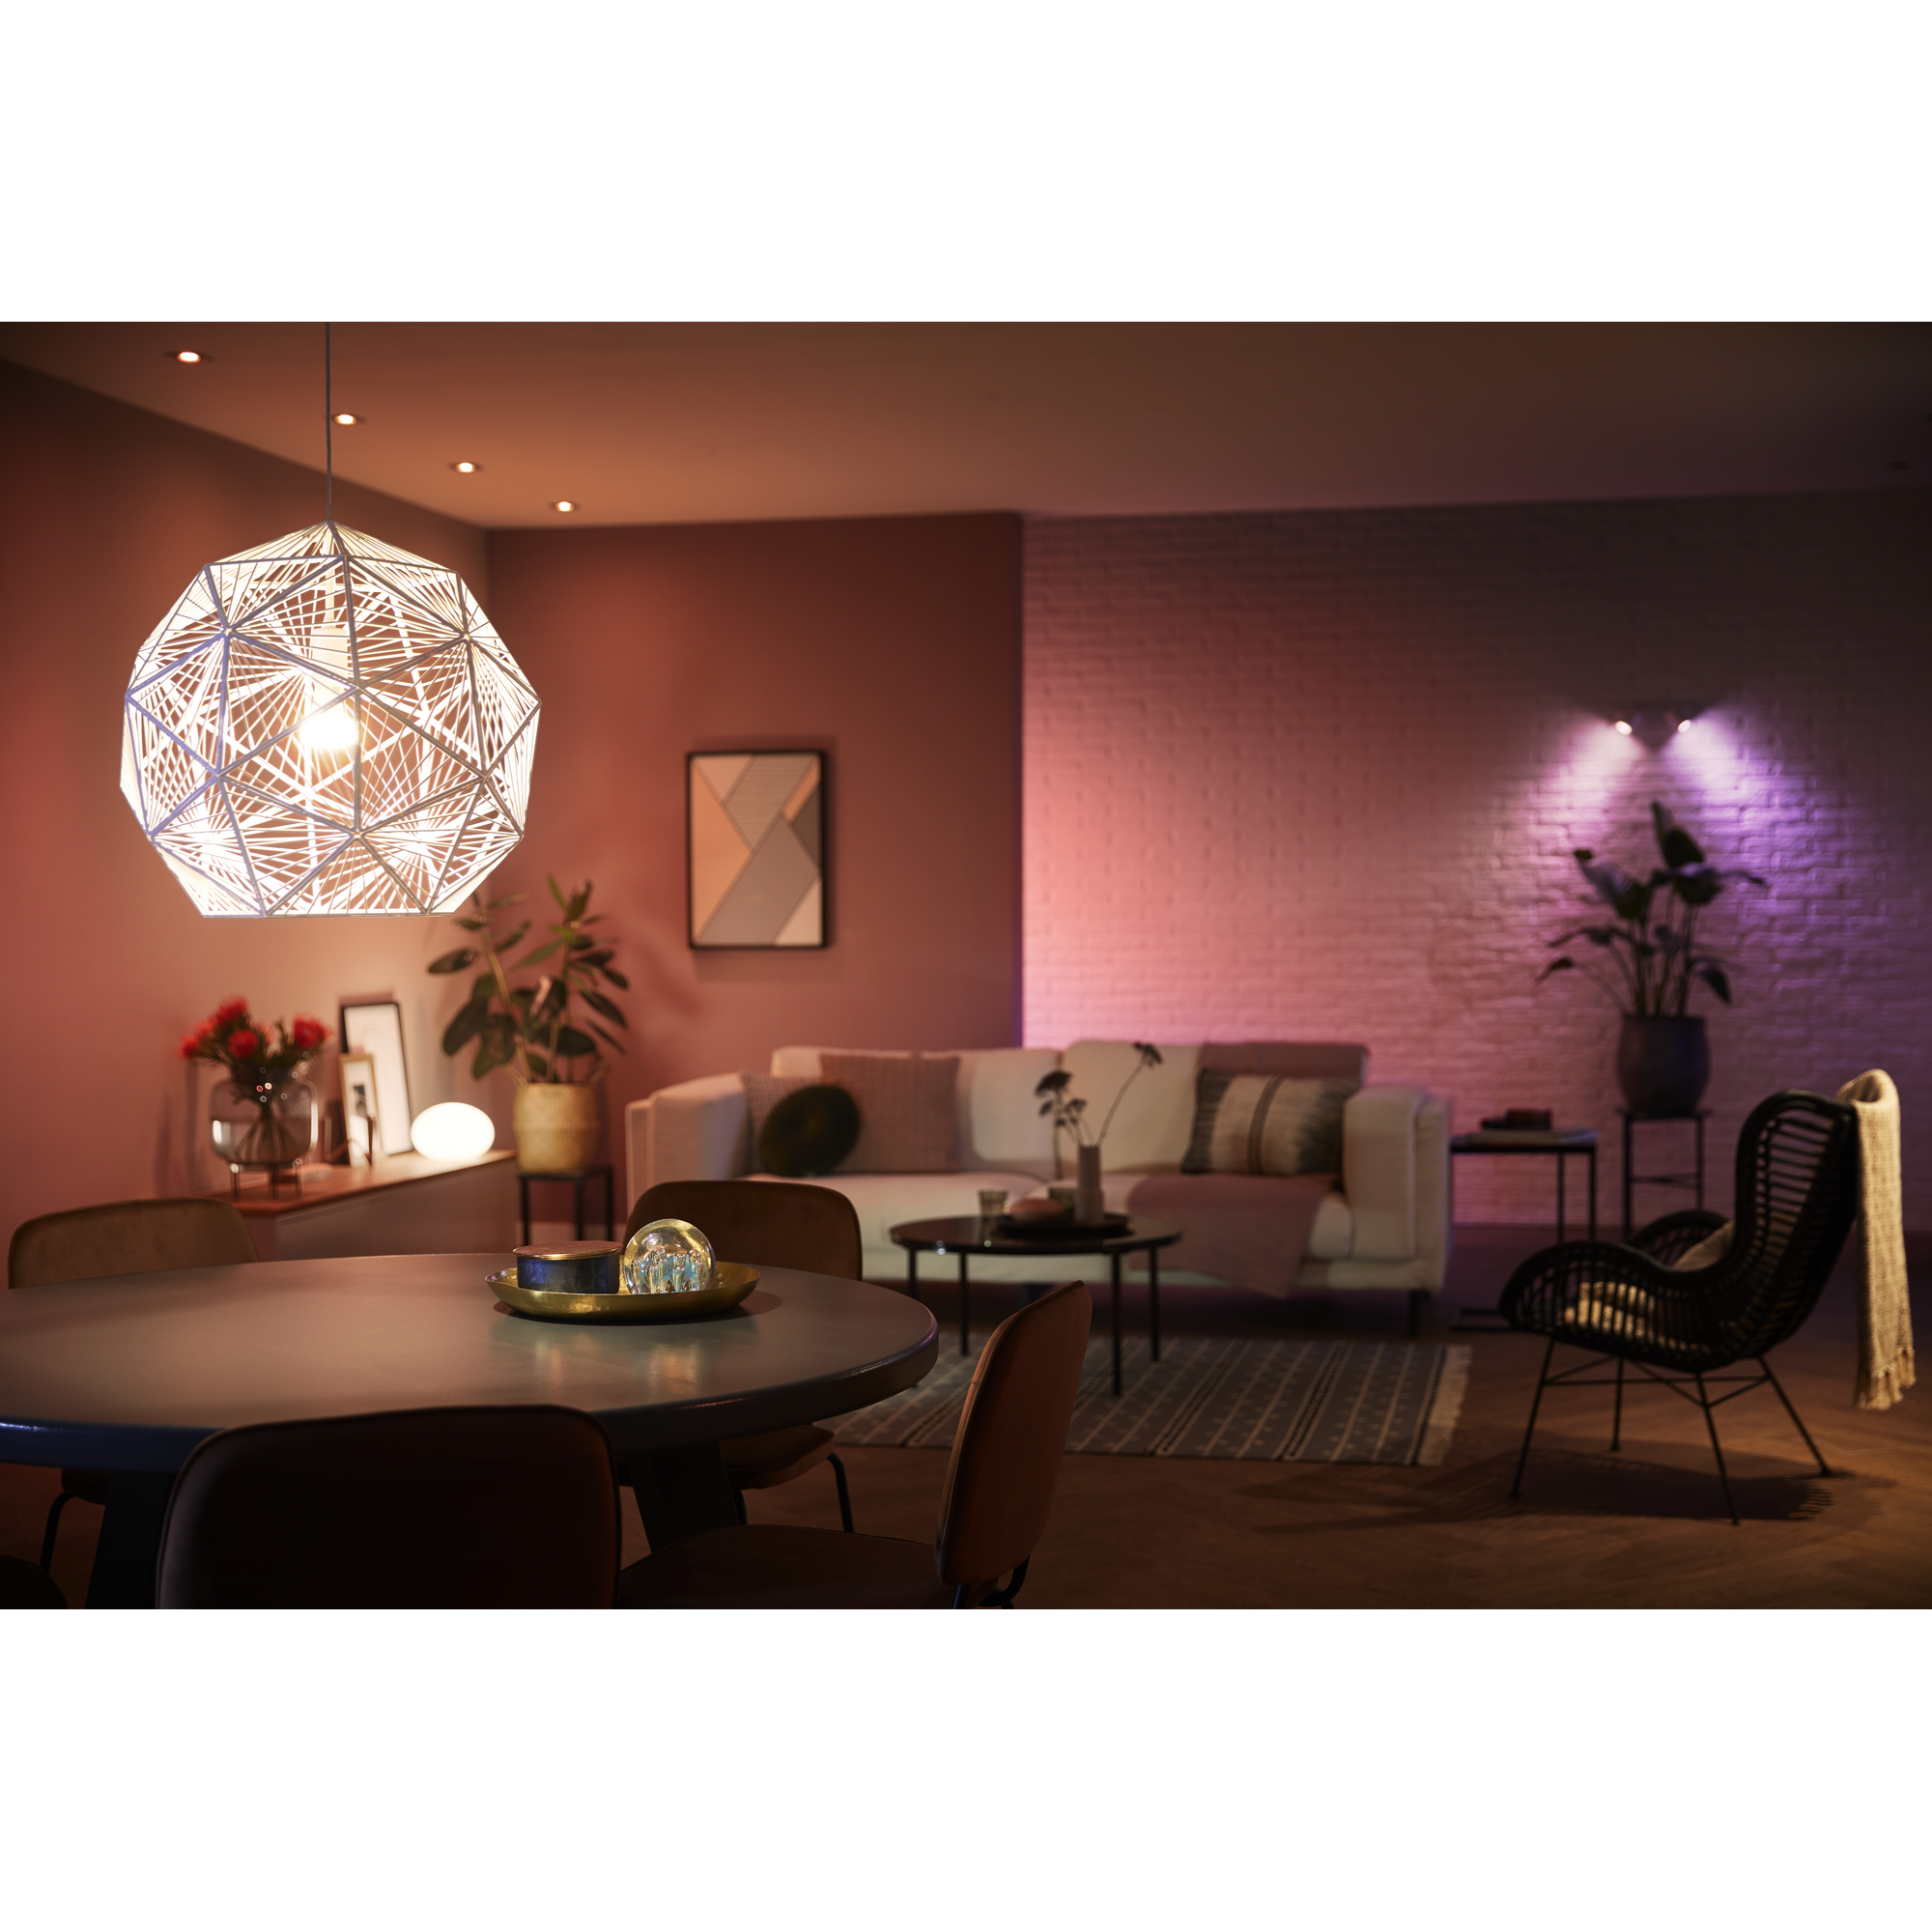 LED-Lampe 'Hue White & Color Ambiance' E27 9 W, 2er-Pack + product picture